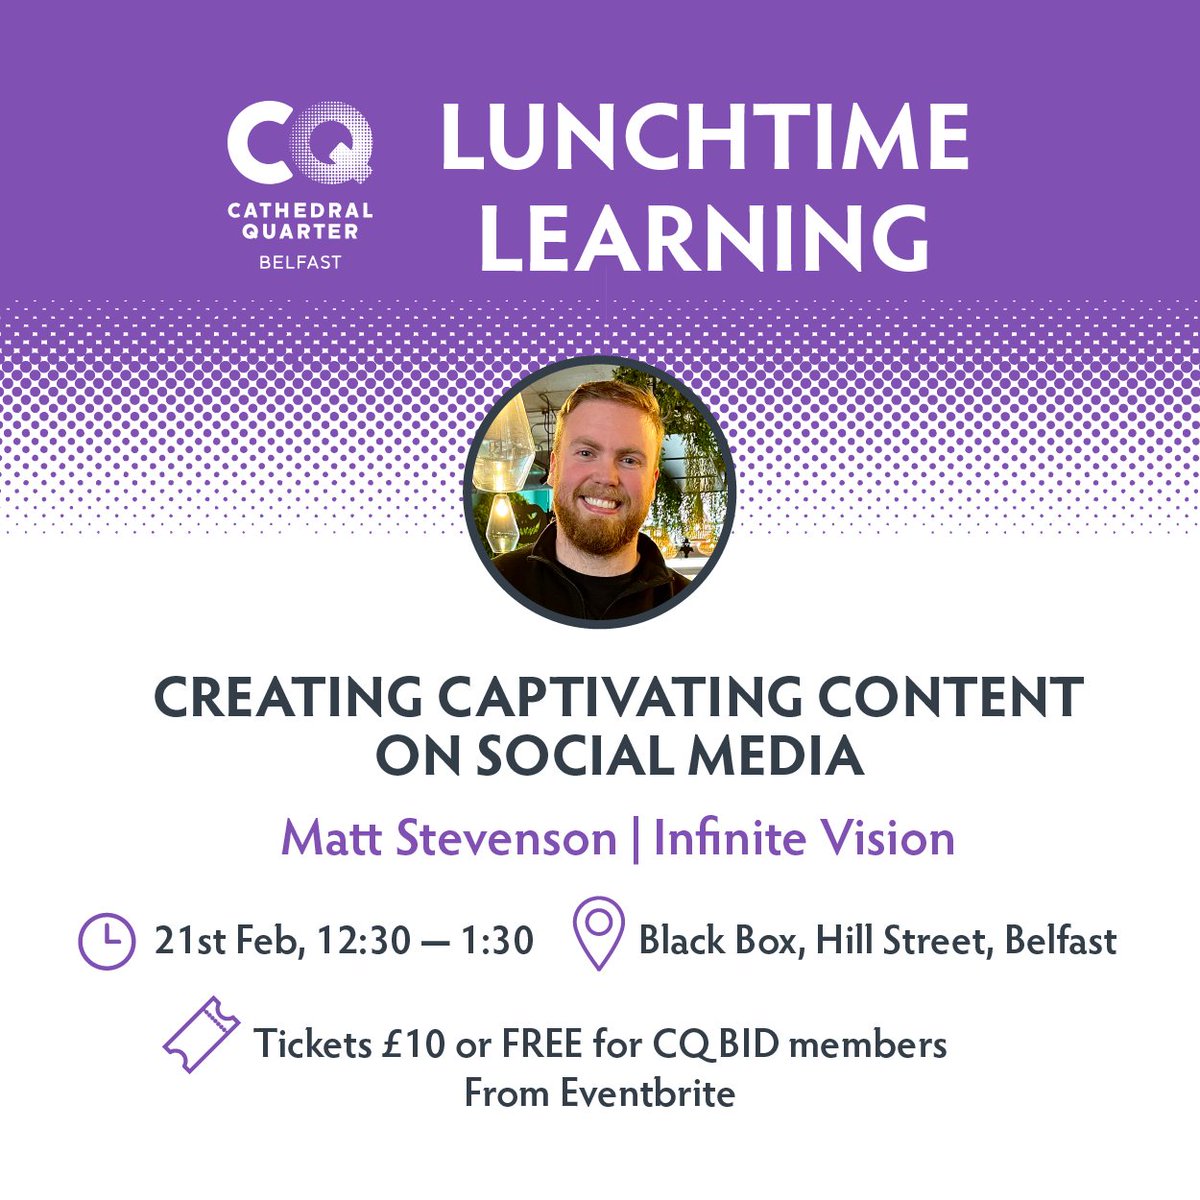 Lunchtime Learning kicks off with content creator Matt Stevenson - who will share all of the secrets and strategies that he has used to generate over 20,000,000 organic views online! 21st Feb, 12.30-1.30pm @BlackBoxBelfast 🎟eventbrite.com/e/lunchtime-le…